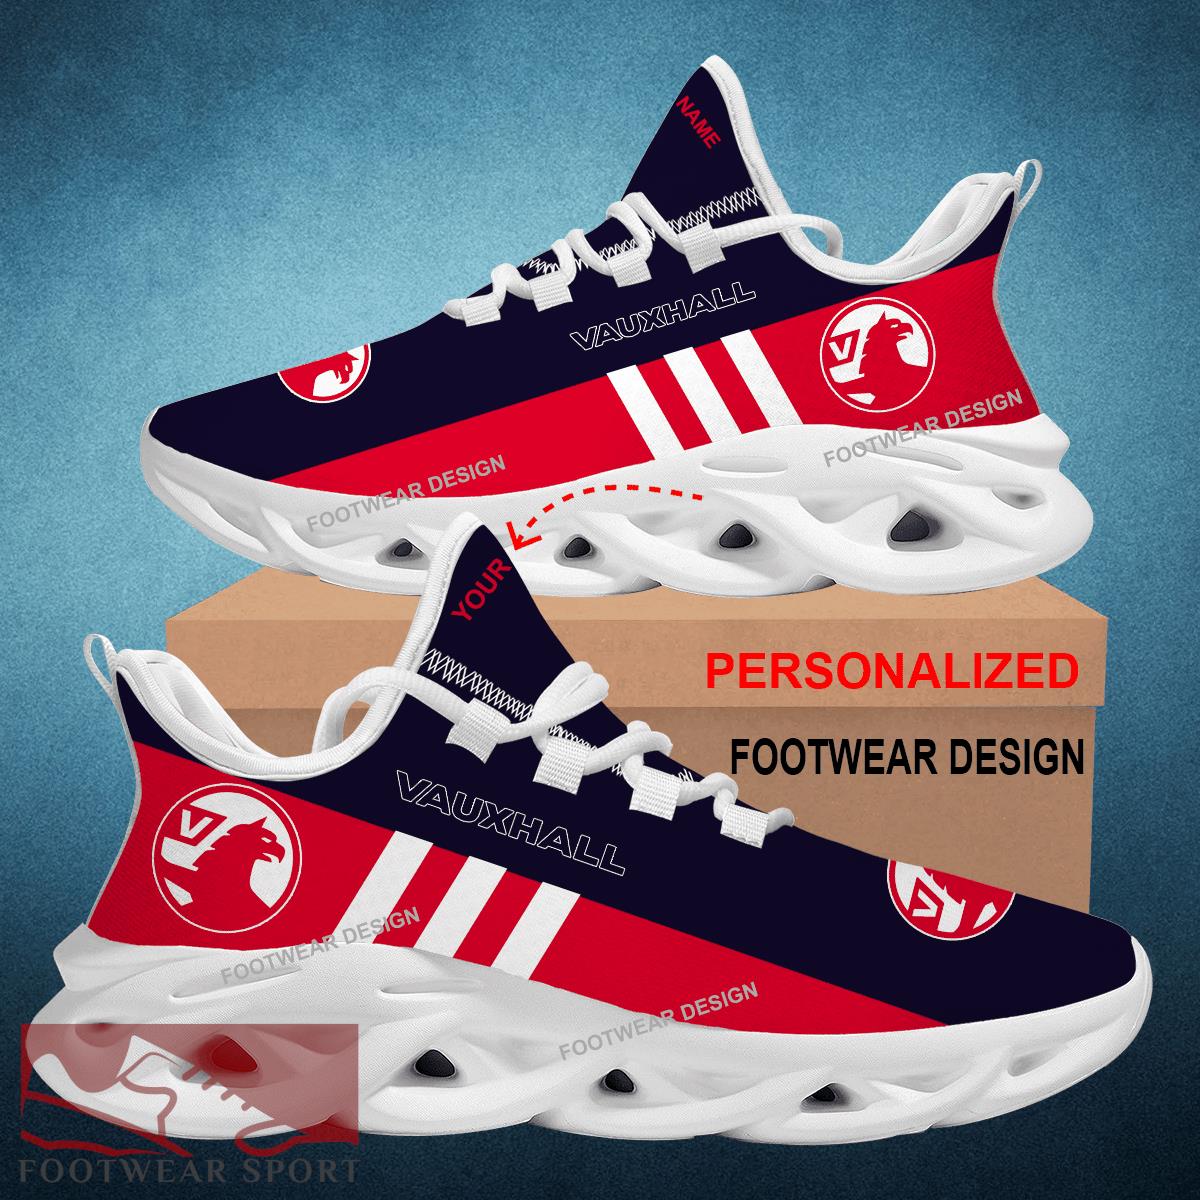 Car Racing Vauxhall Style Chunky Shoes New Design Gift Fans Max Soul Sneakers Personalized - Car Racing Vauxhall Logo New Style Chunky Shoes Photo 2